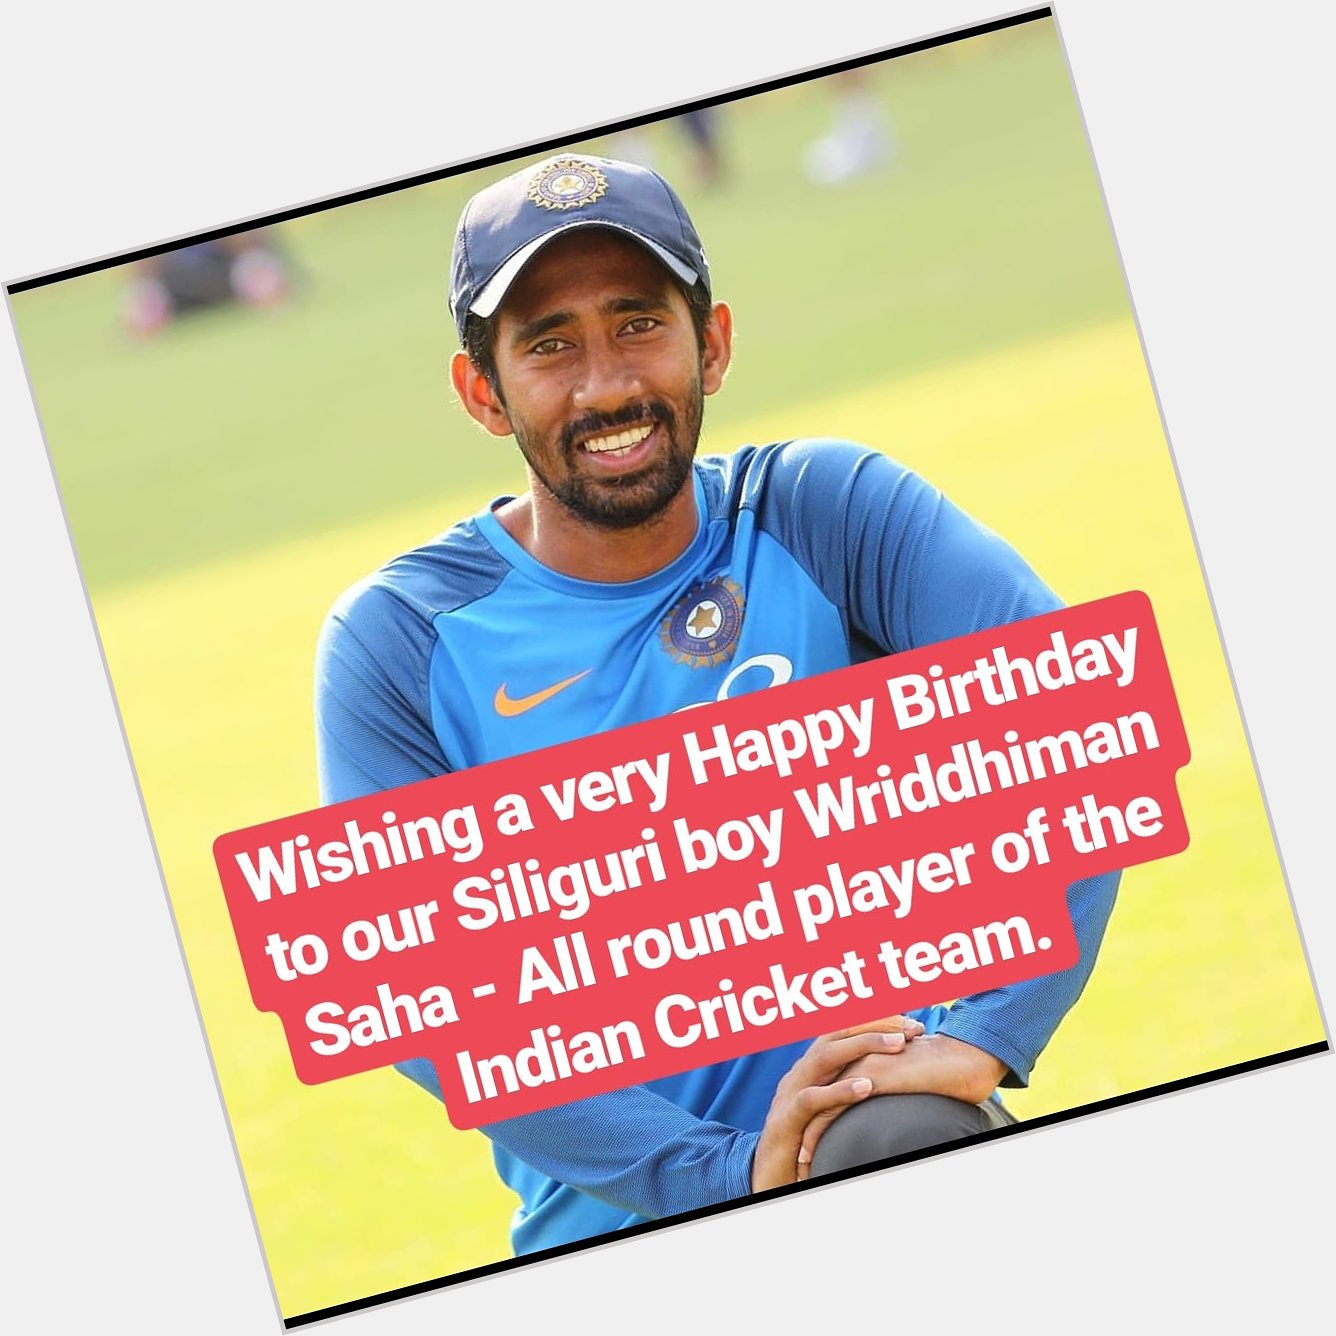 Wishing a very Happy Birthday to our Siliguri boy Wriddhiman Saha - All round player of the Indian Cricket team. 